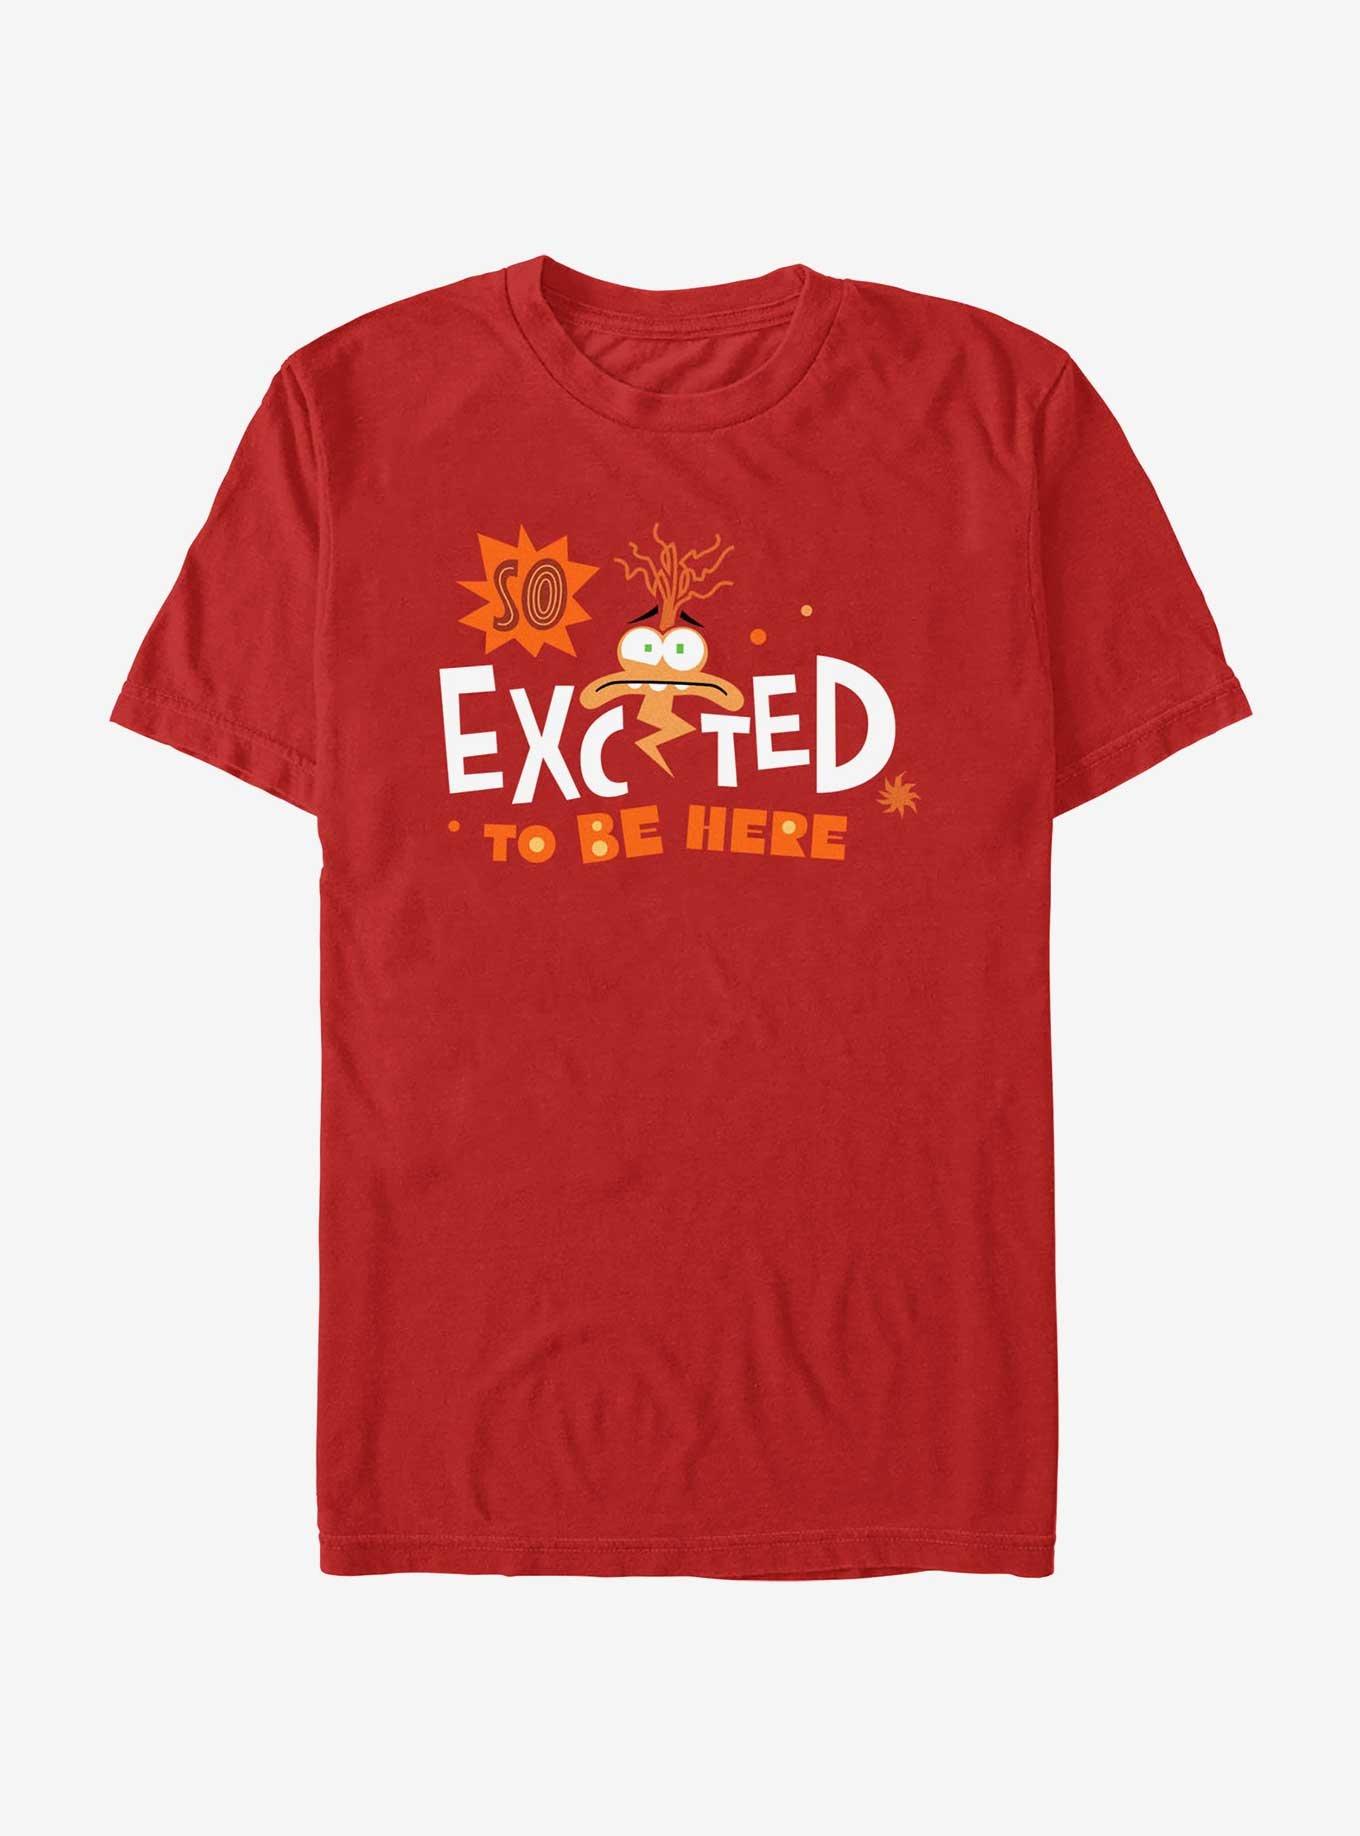 Disney Pixar Inside Out 2 Anxiety So Excited To Be Here T-Shirt, RED, hi-res